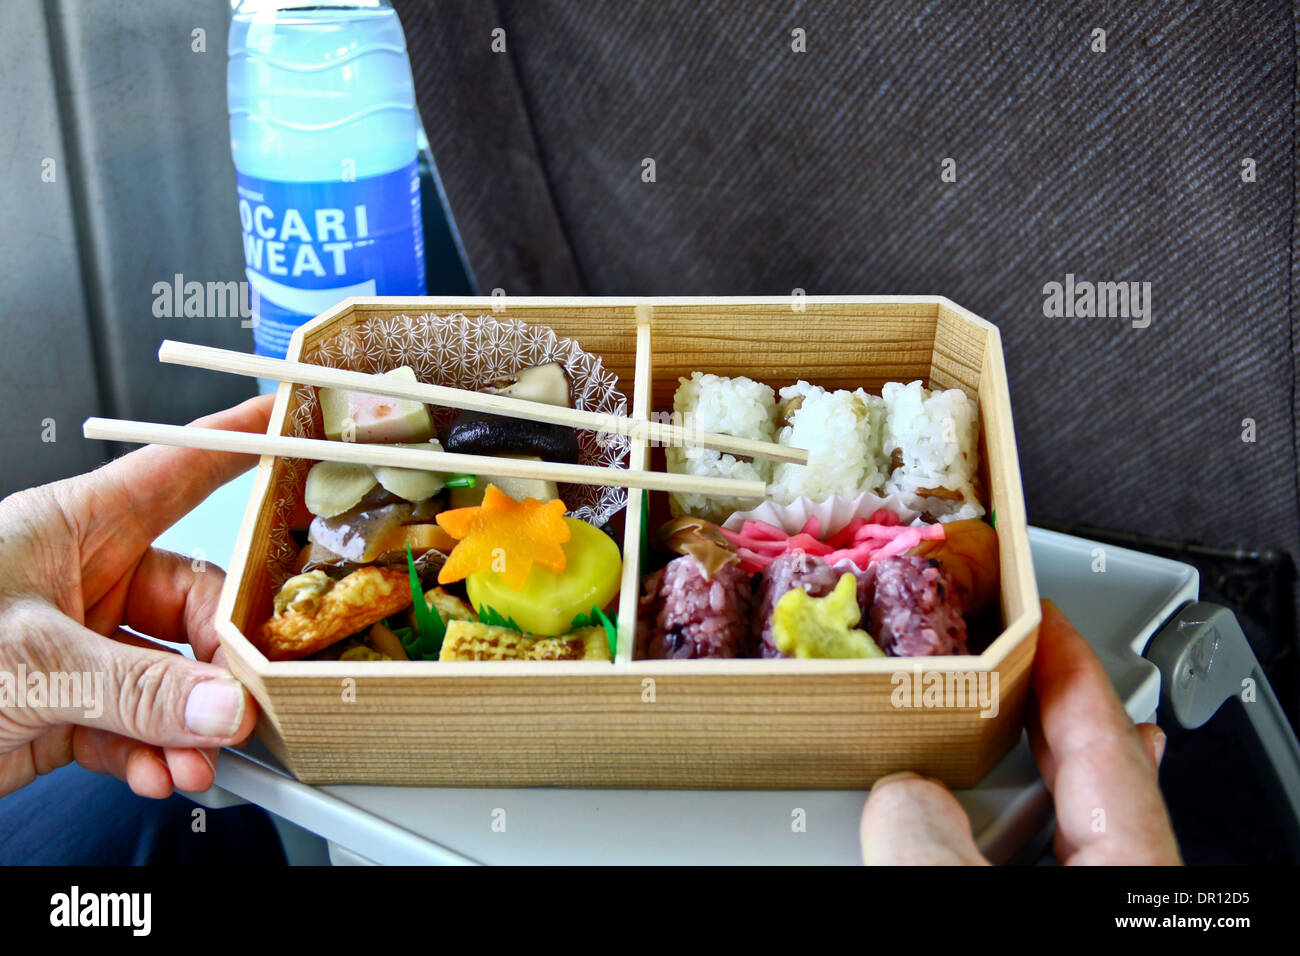 https://c8.alamy.com/comp/DR12D5/a-typical-bento-a-japanese-lunch-box-filled-with-rice-fish-meat-and-DR12D5.jpg